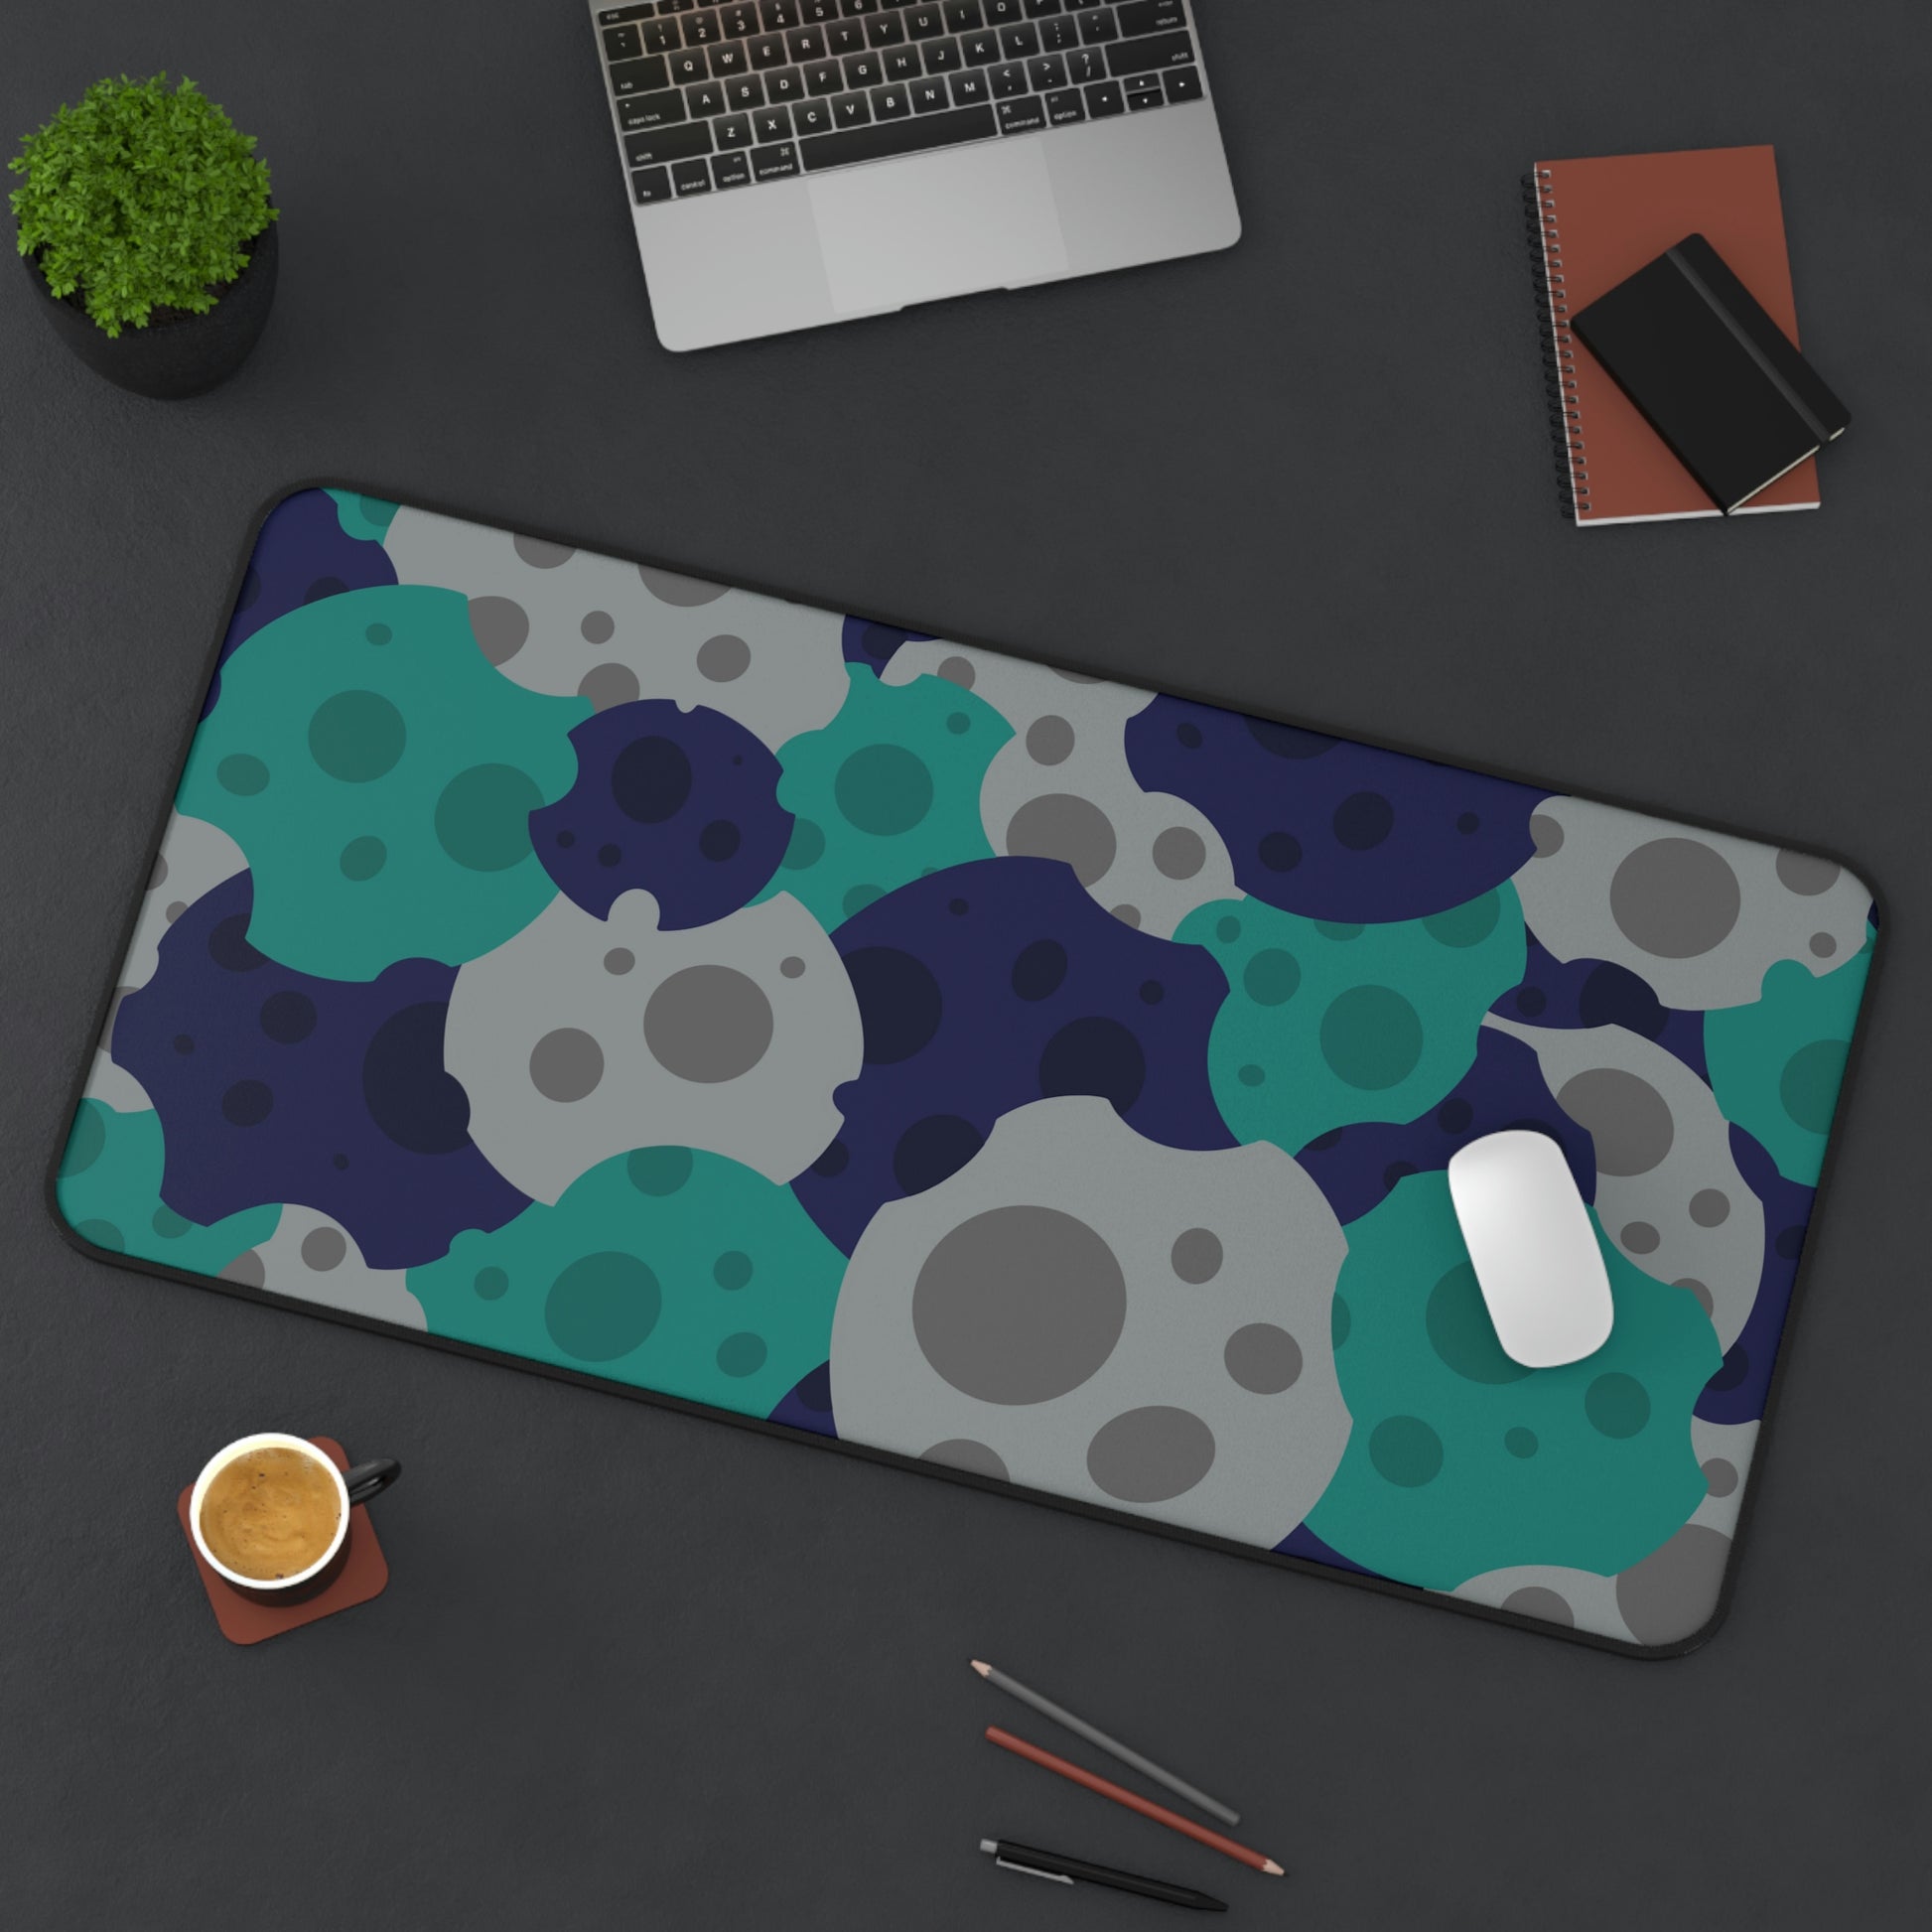 A 31" x 15.5" desk mat with gray, teal, and dark blue meteorites sitting at an angle.